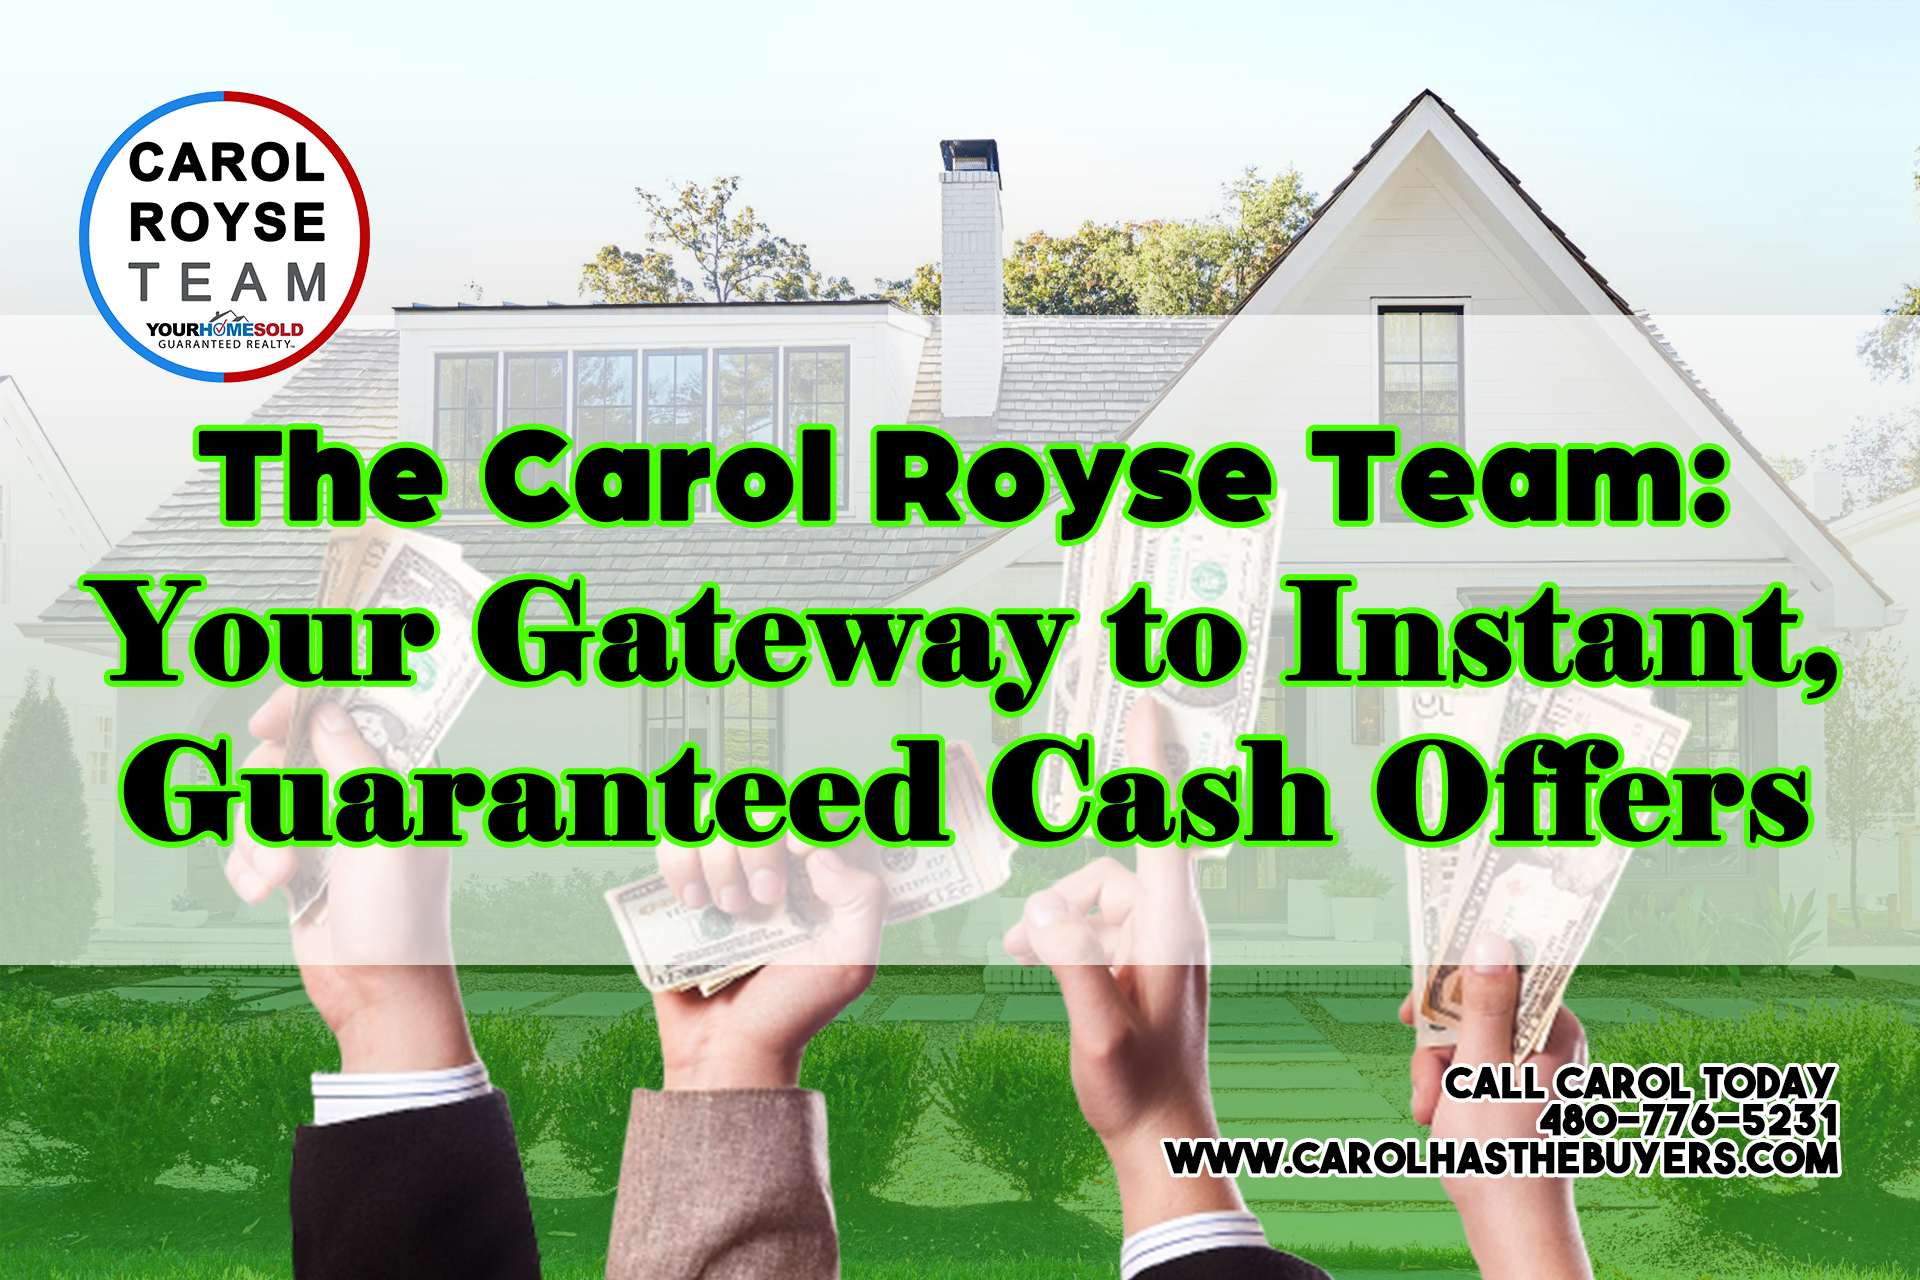 The Carol Royse Team: Your Gateway to Instant, Guaranteed Cash Offers